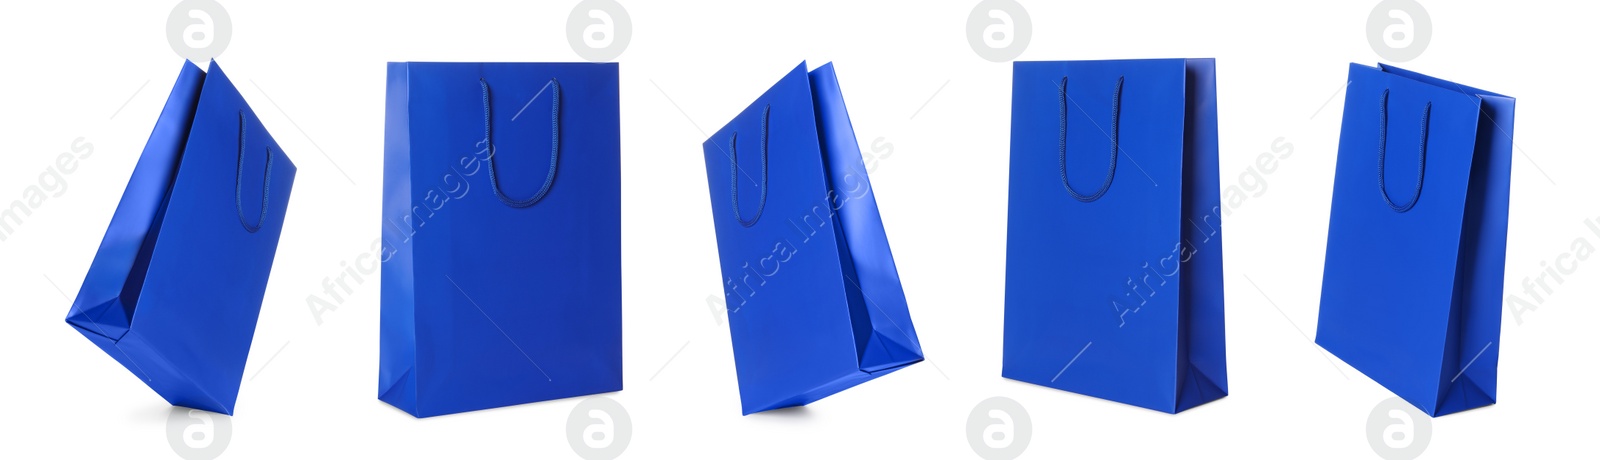 Image of Blue shopping bag isolated on white, different sides